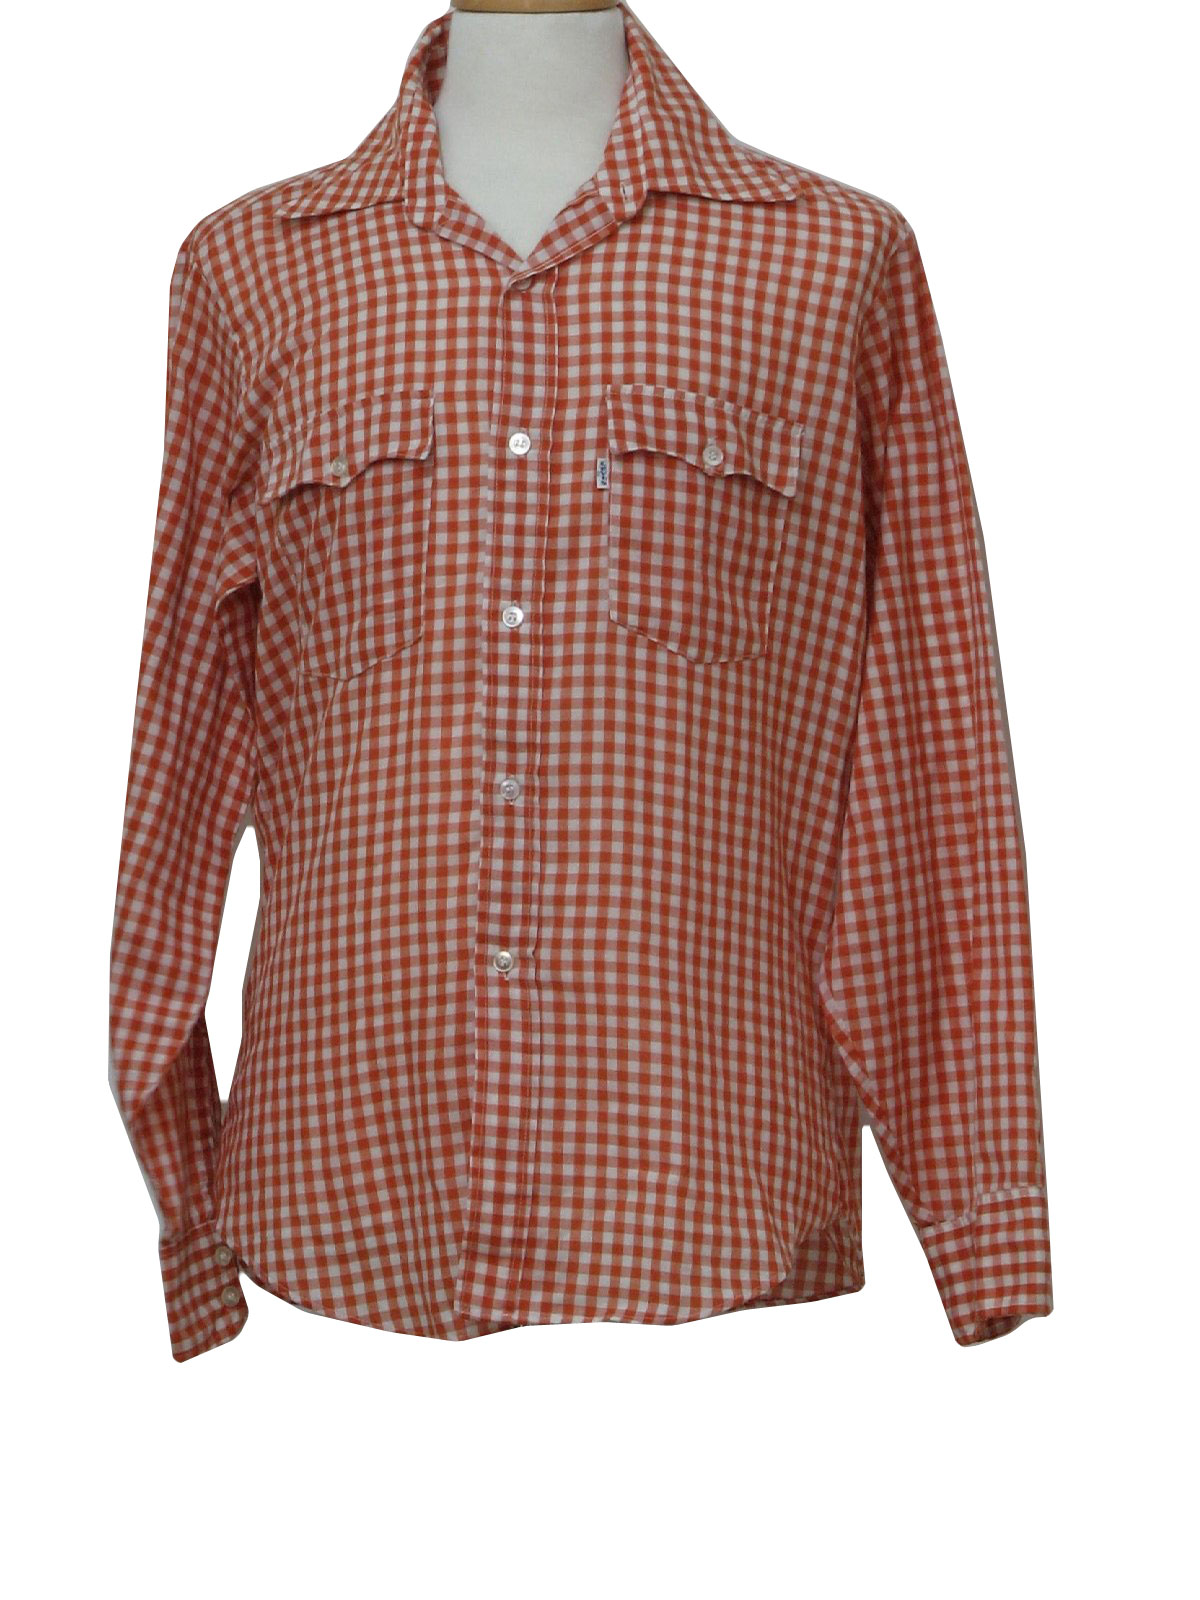 60s Vintage Levis Western Shirt: 70s -Levis- Mens red and white gingham ...